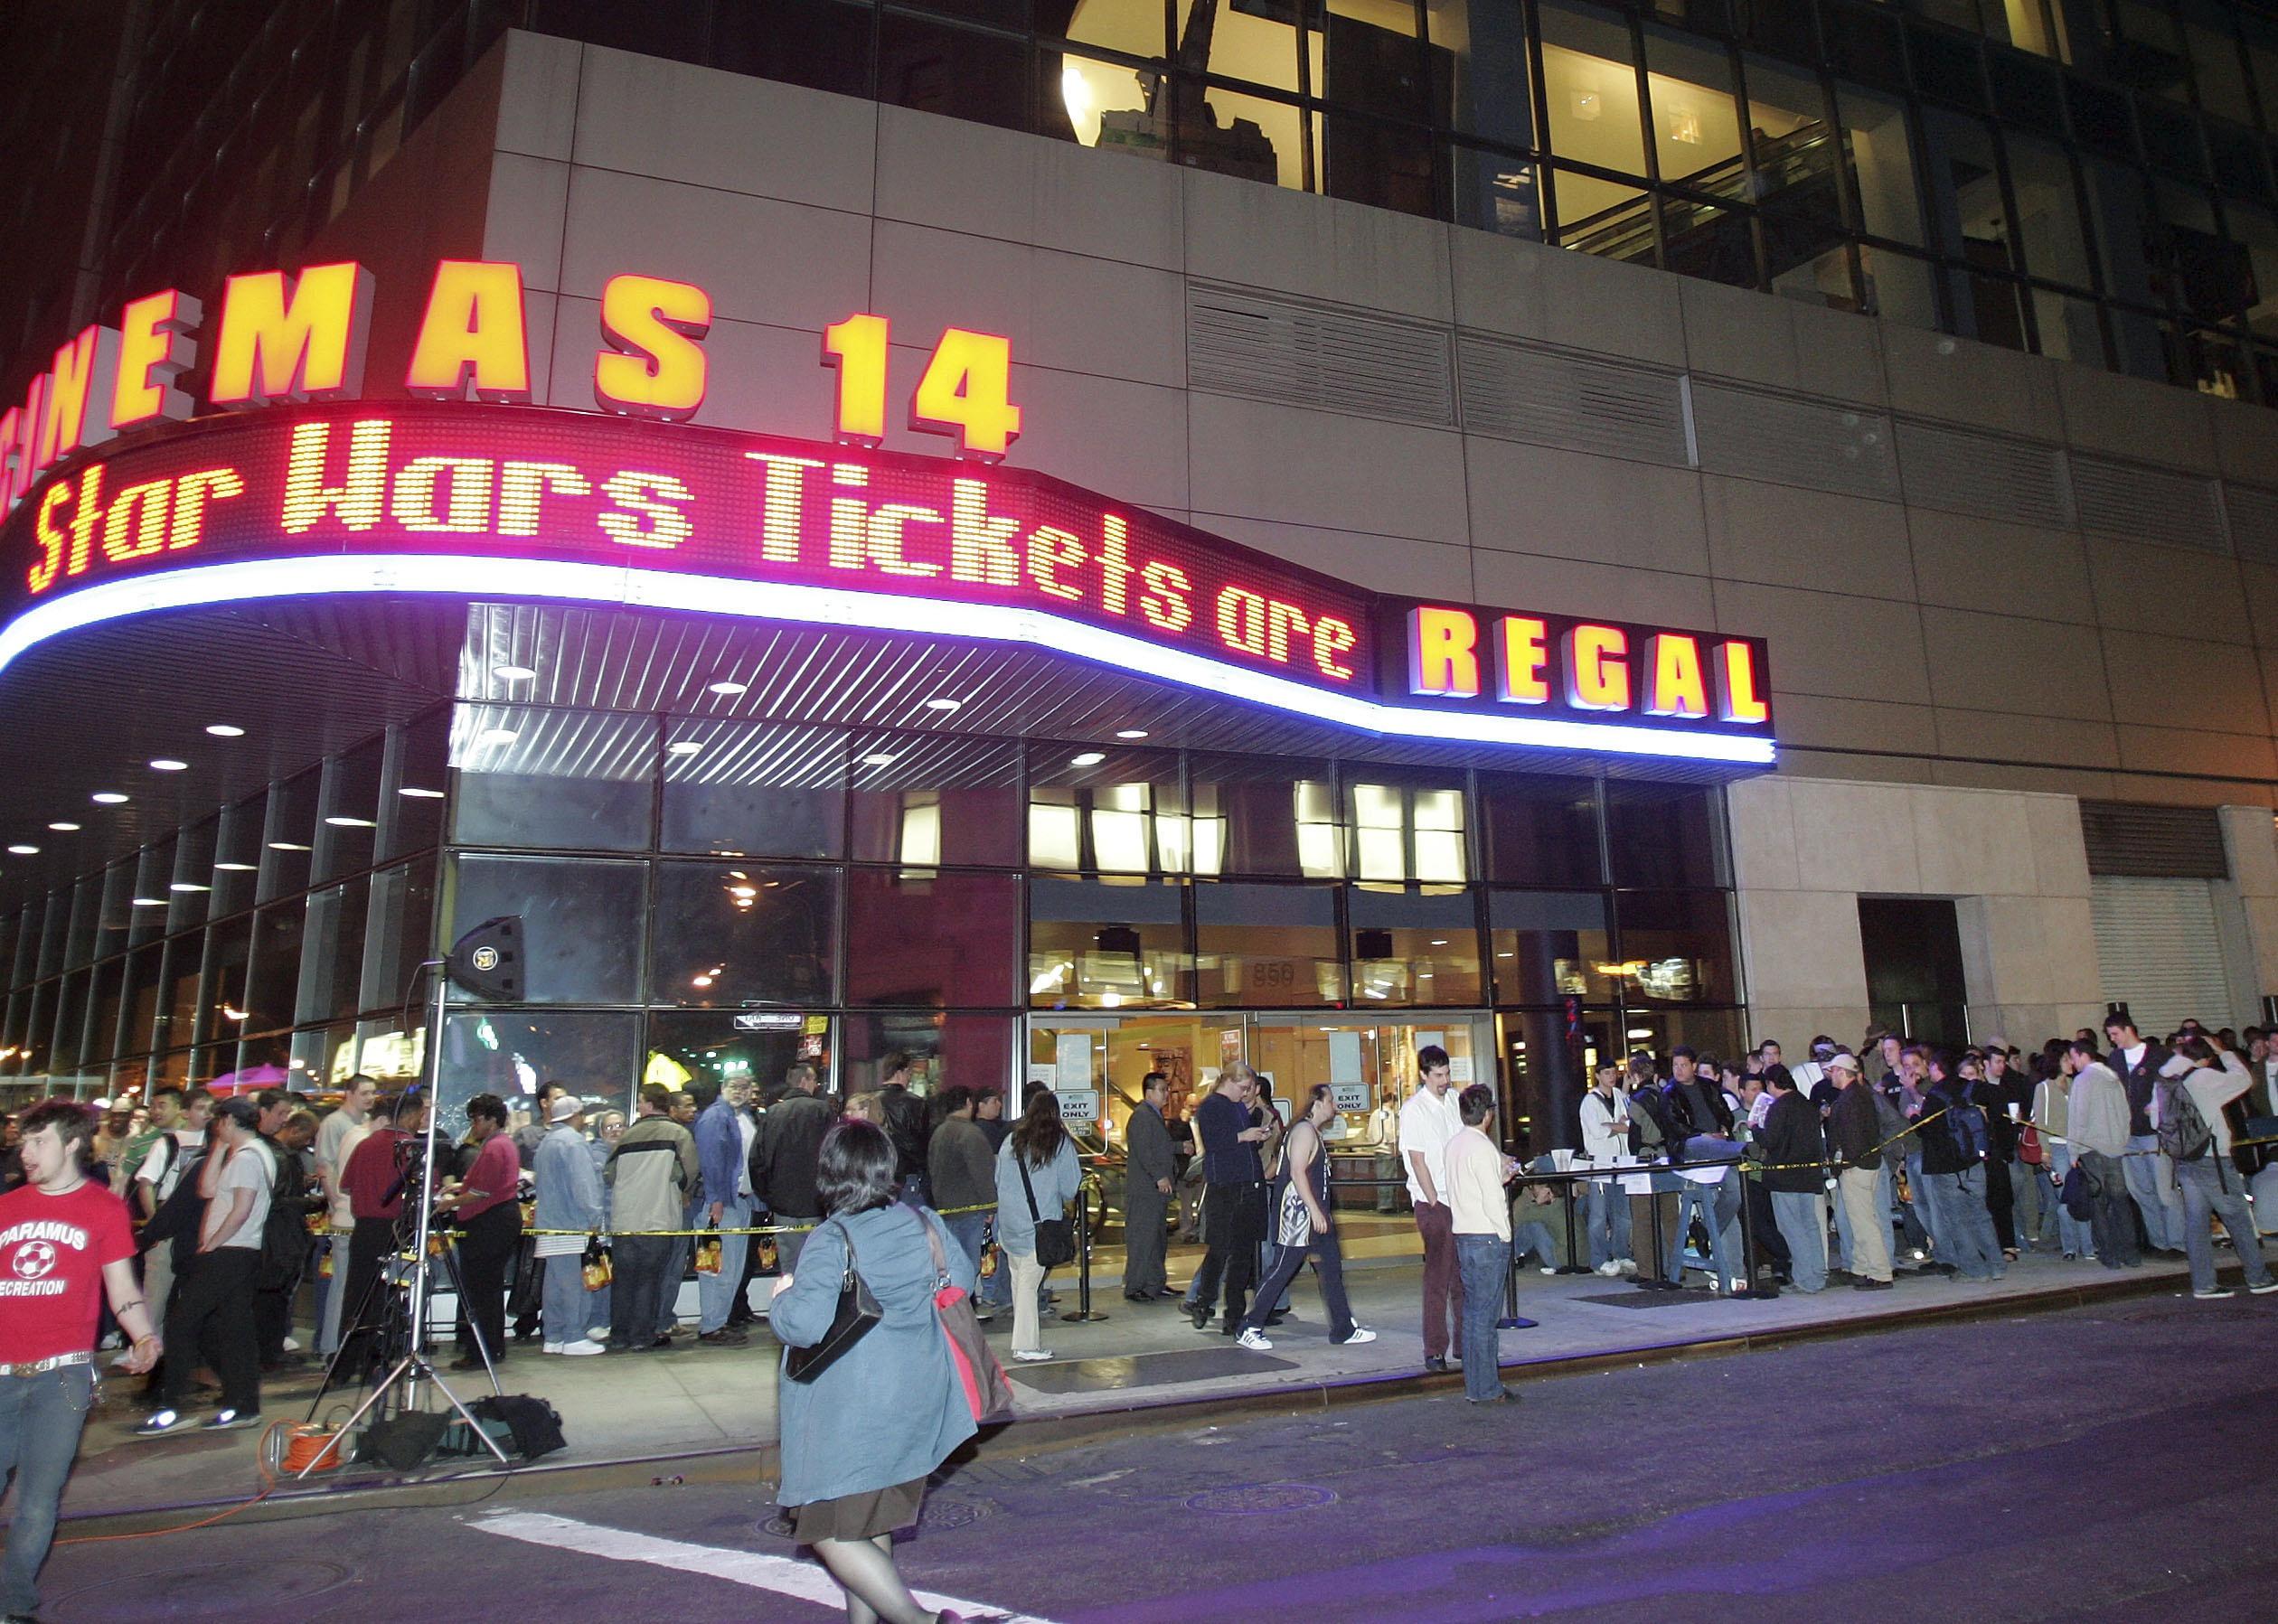 Star Wars fans line up around the outside of the theater with neon signs announcing the movie.